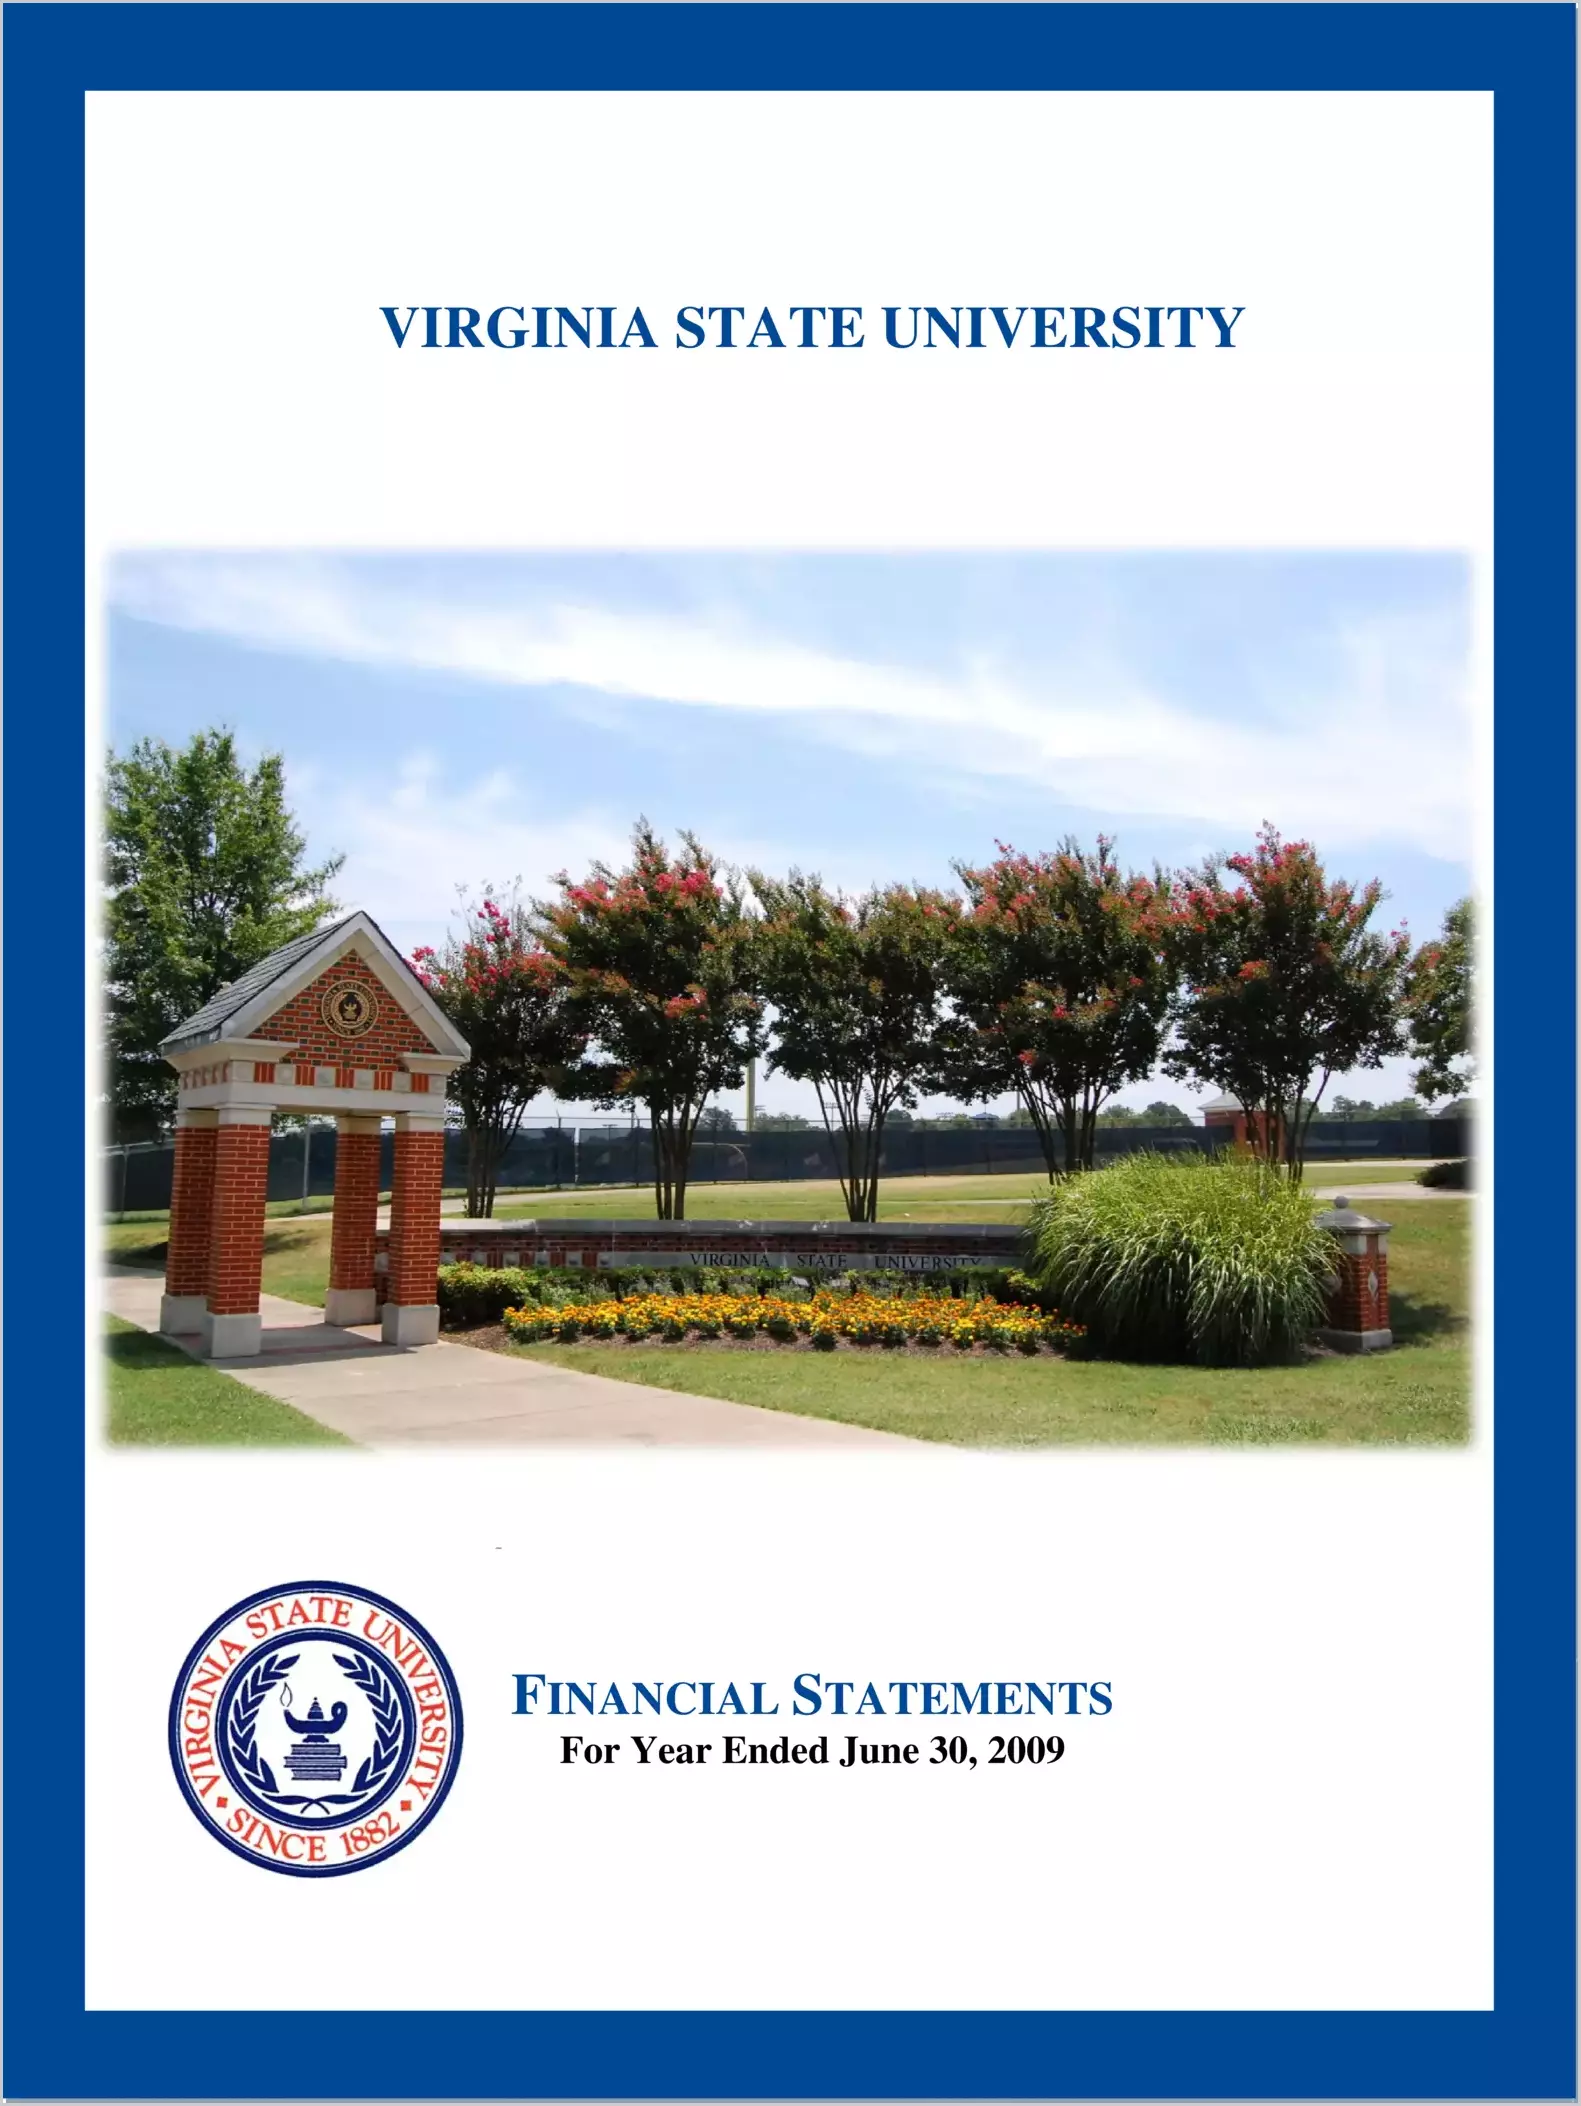 Virginia State University Financial Statements for the year ended June 30, 2009